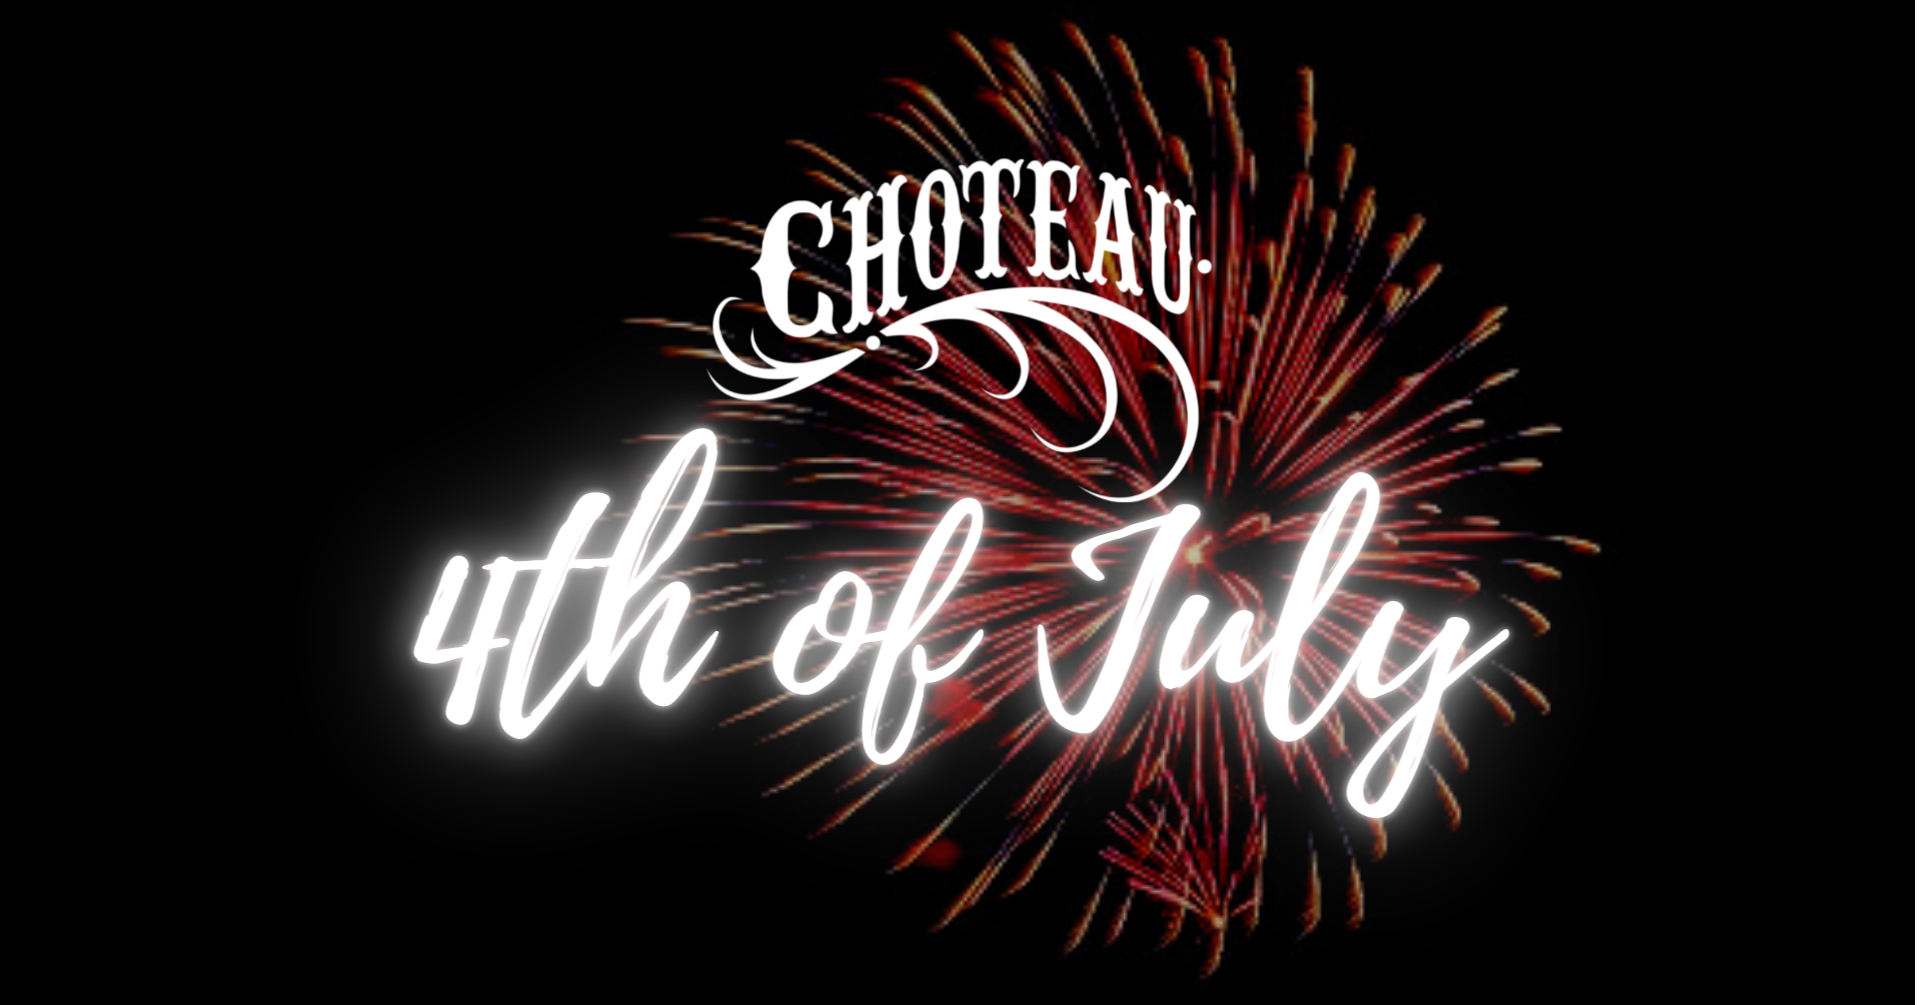 Choteau 4th of July superimposed over an image of fireworks